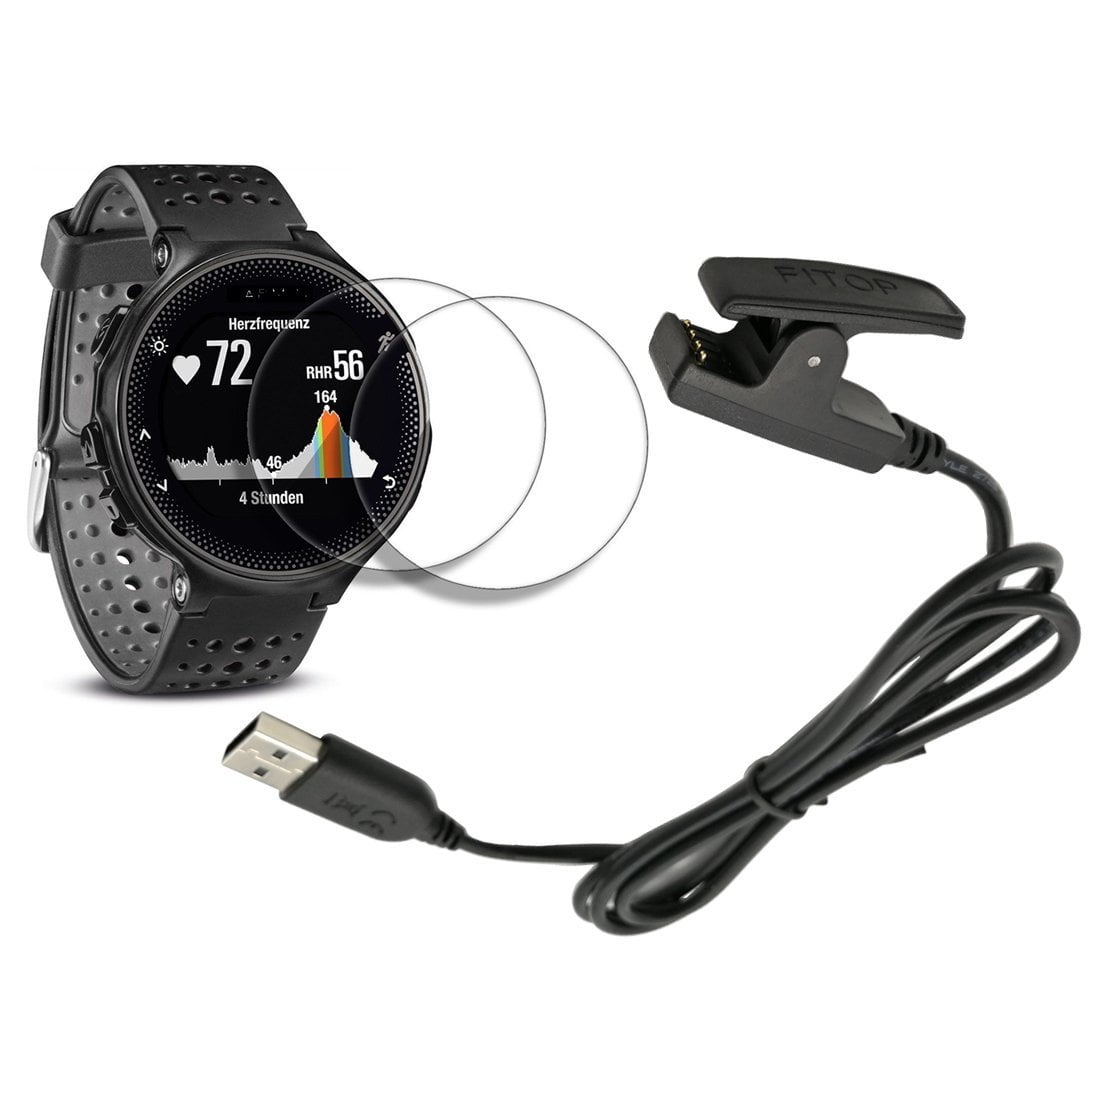 X1 for Garmin forerunner 235 Charger 230 630 Charging Clip Sync Data Cable  + X2 FREE HD Tempered Glass Screen Protector for Garmin Foreruuner sports  Watch 